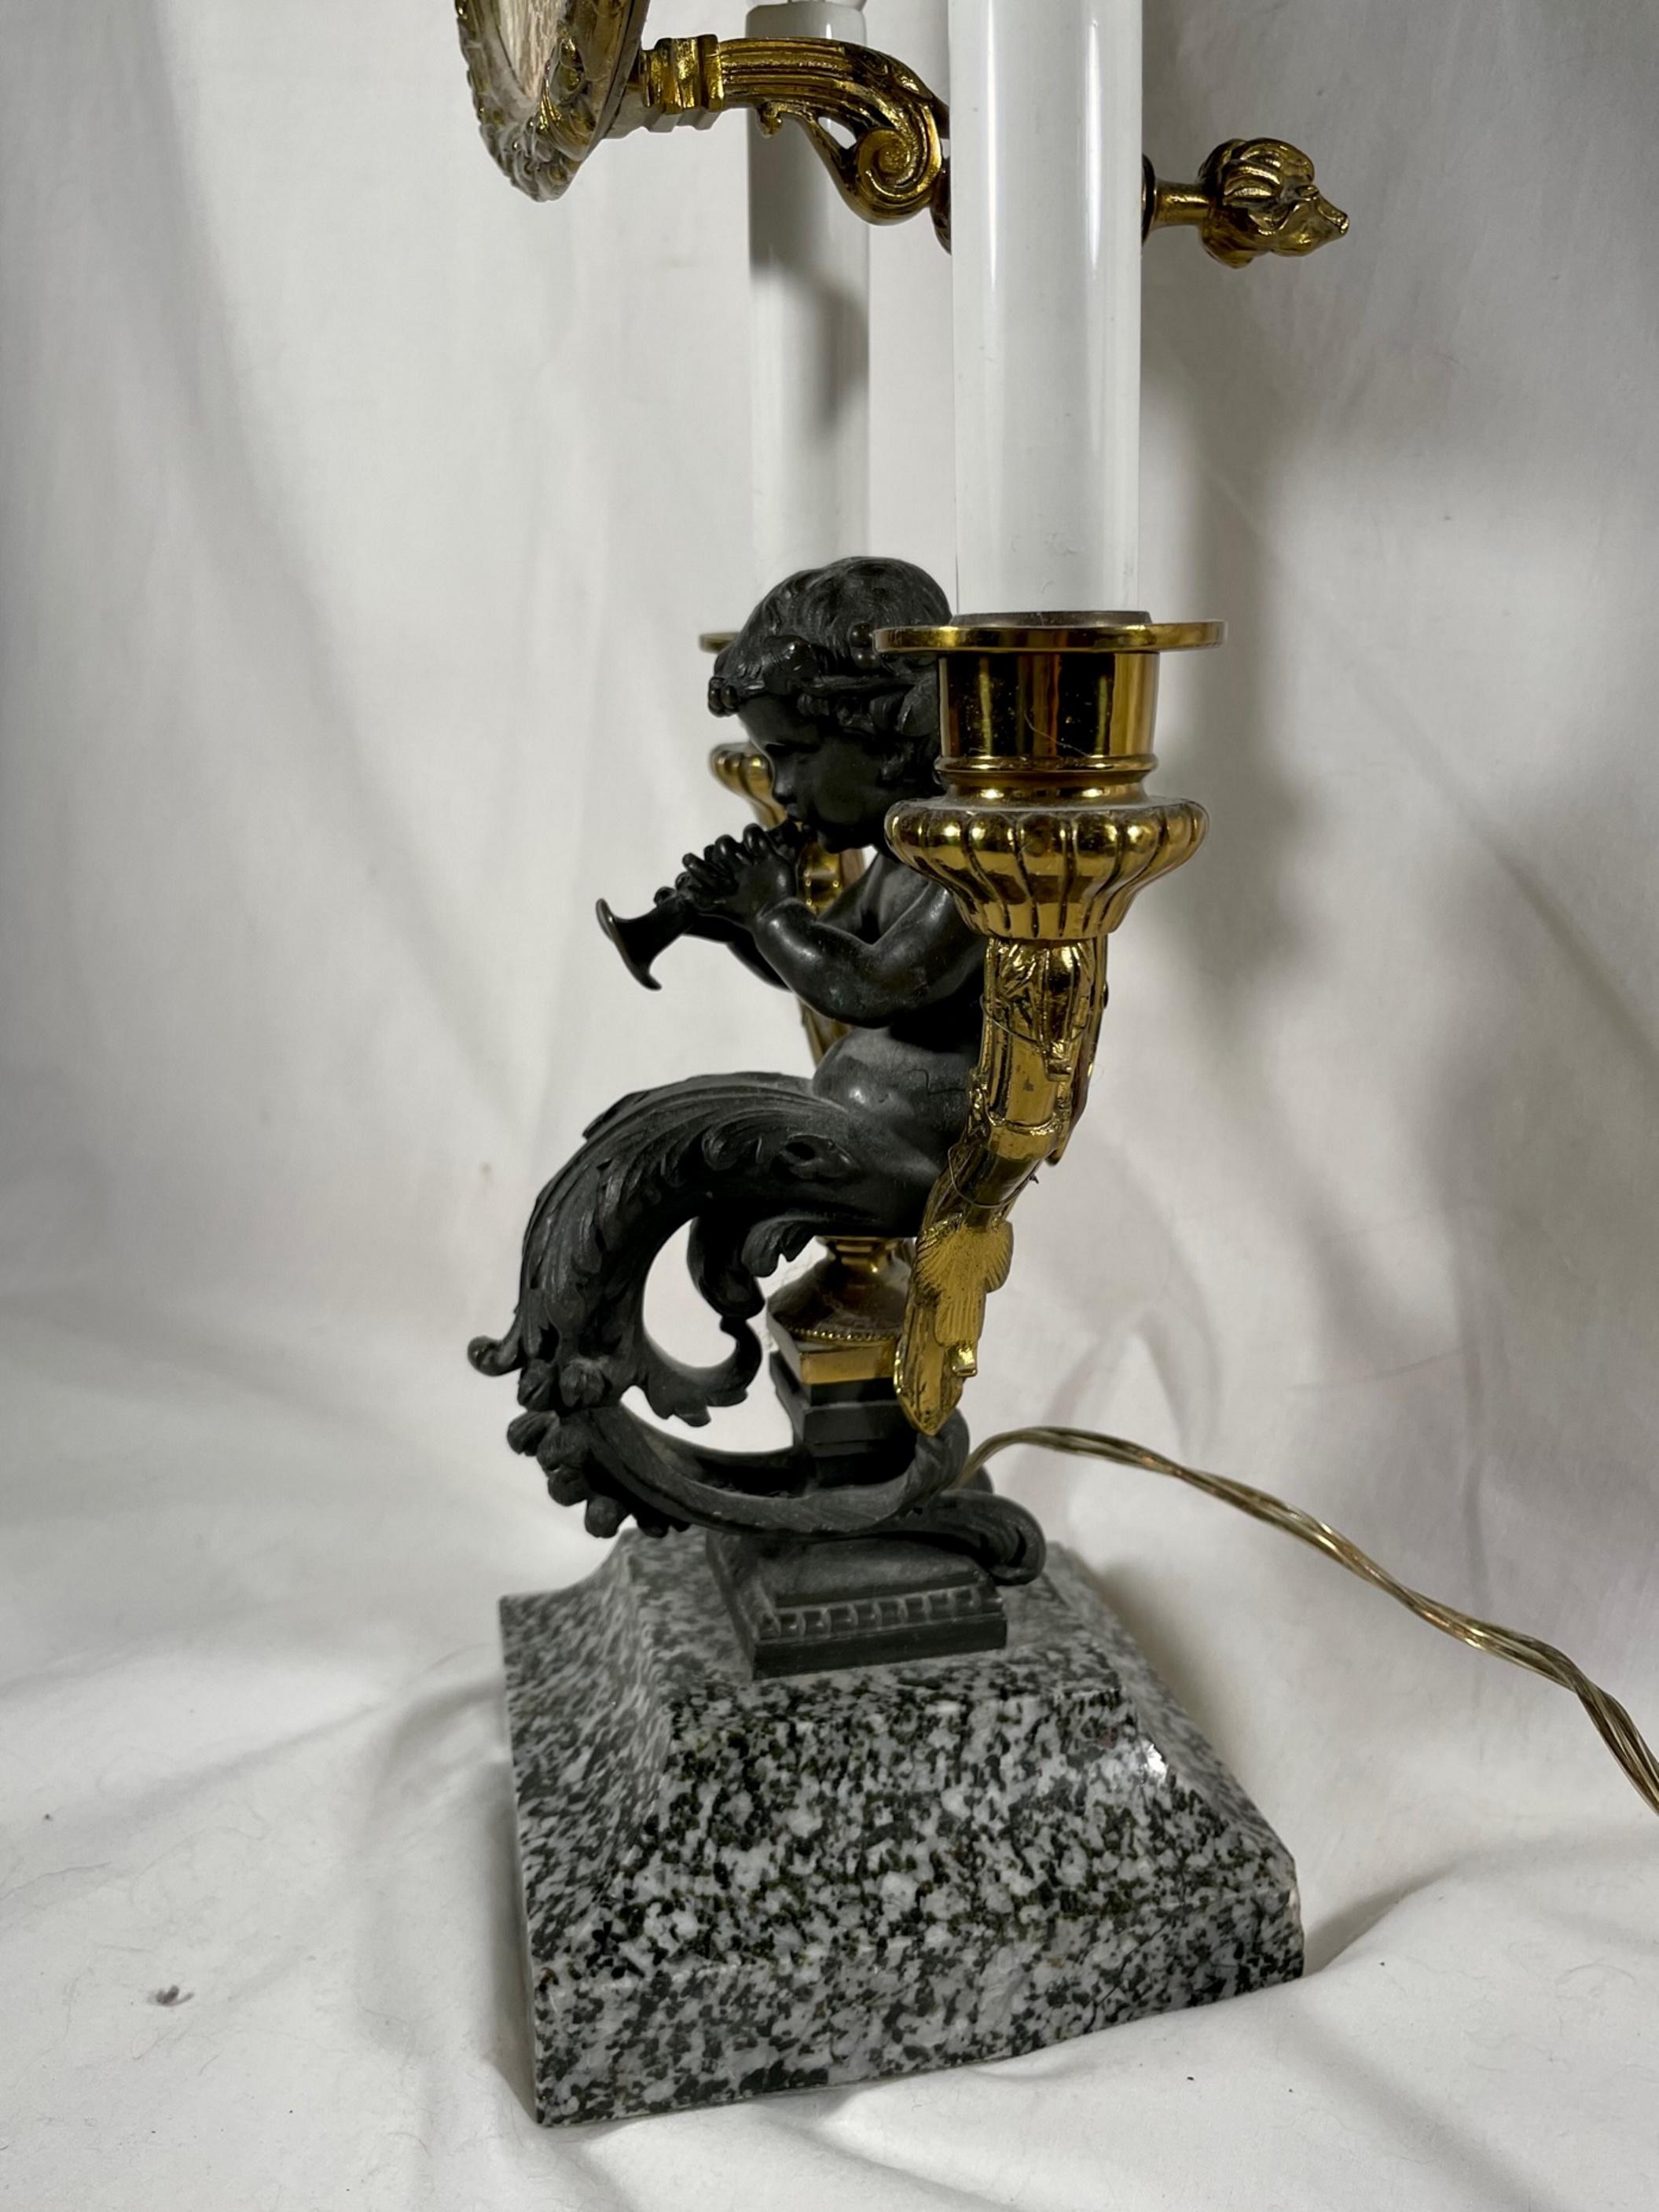 19th C. Louis XV Style Bronze Two Light Table Lamp with Adjustable “Pare-feu